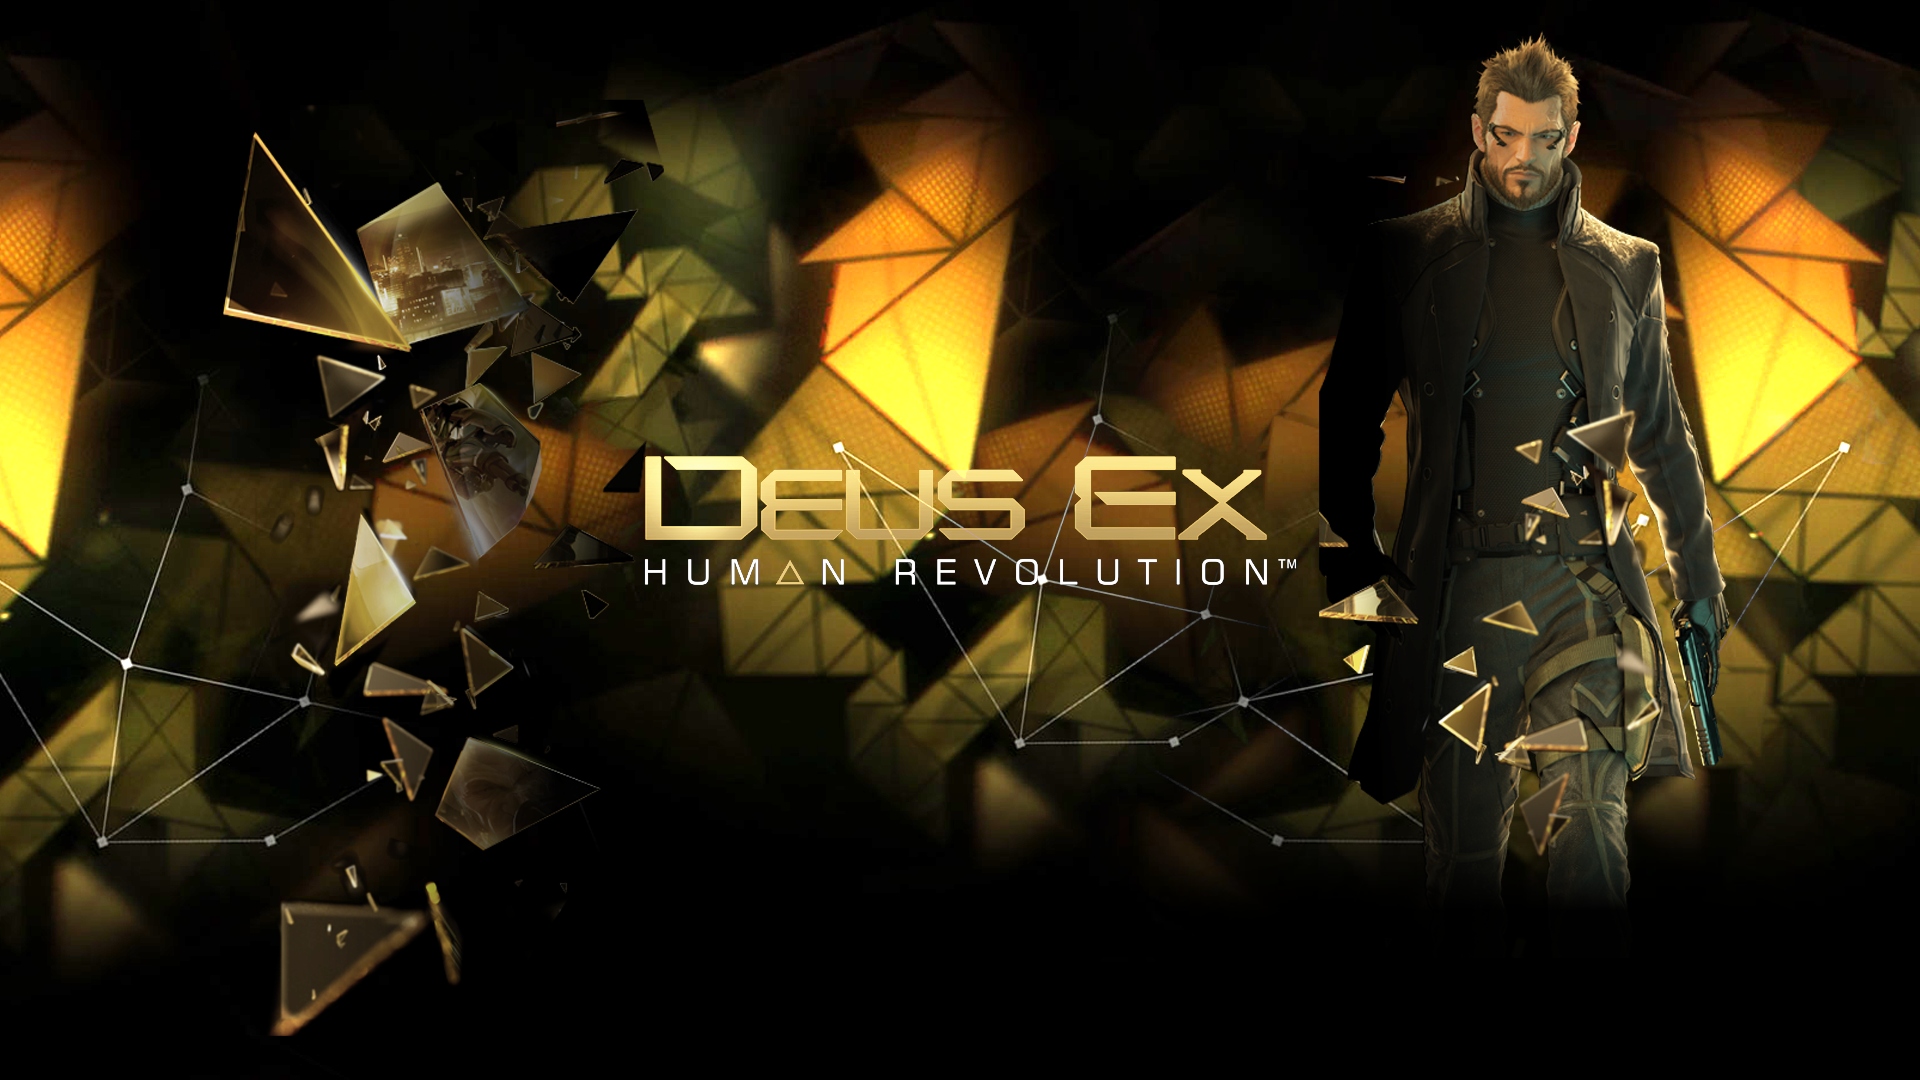 A blog on Deus Ex and Posthumanism in gaming